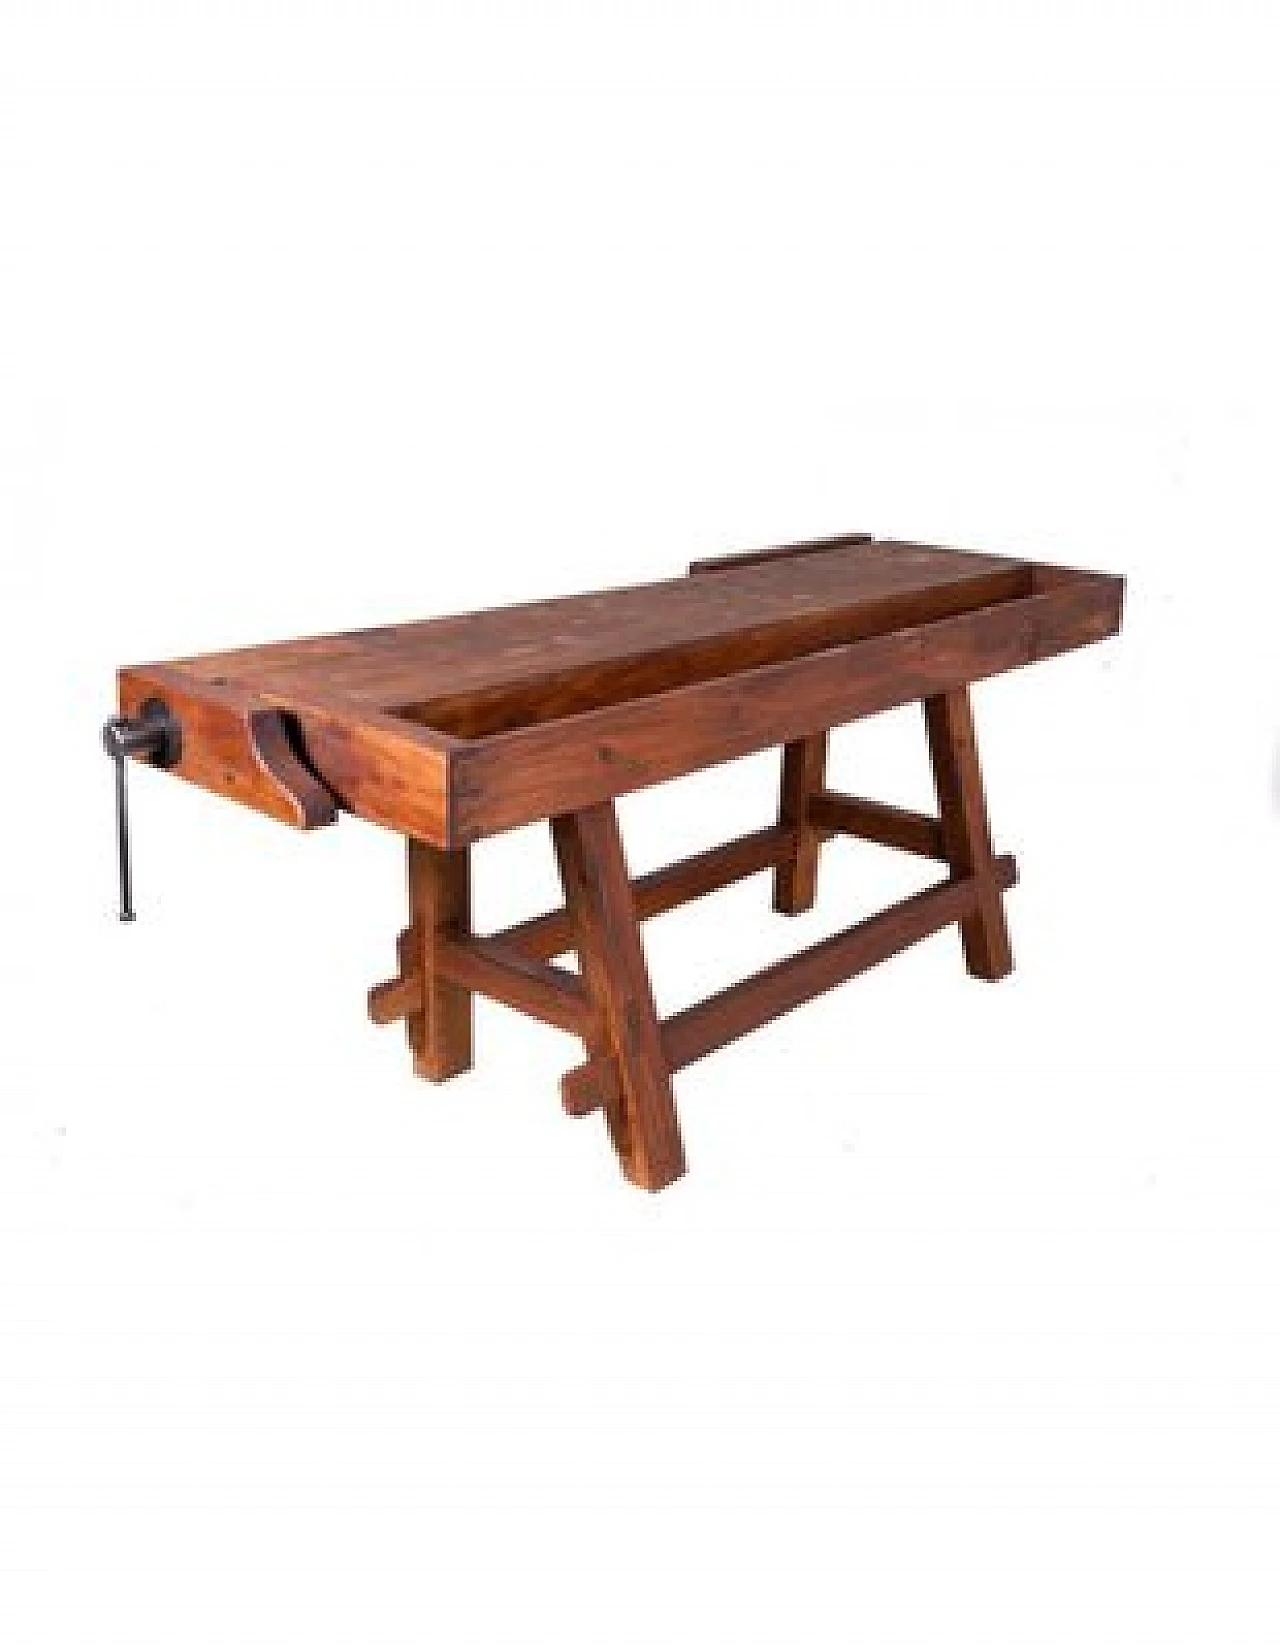 Solid wood and cast iron carpenter's bench 6